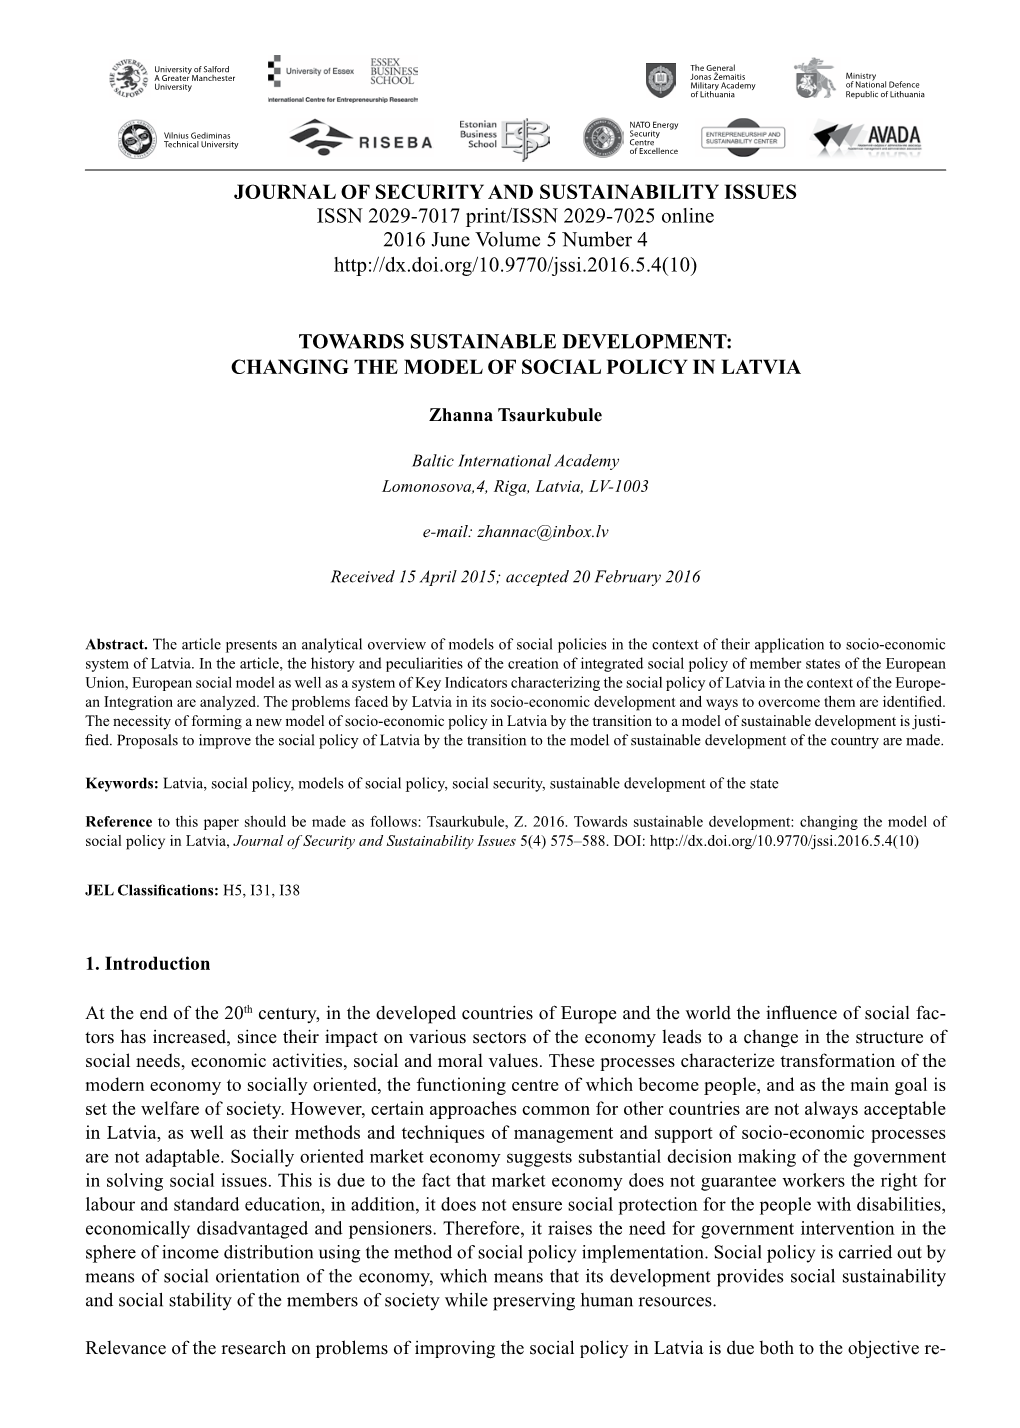 Towards Sustainable Development: Changing the Model of Social Policy in Latvia